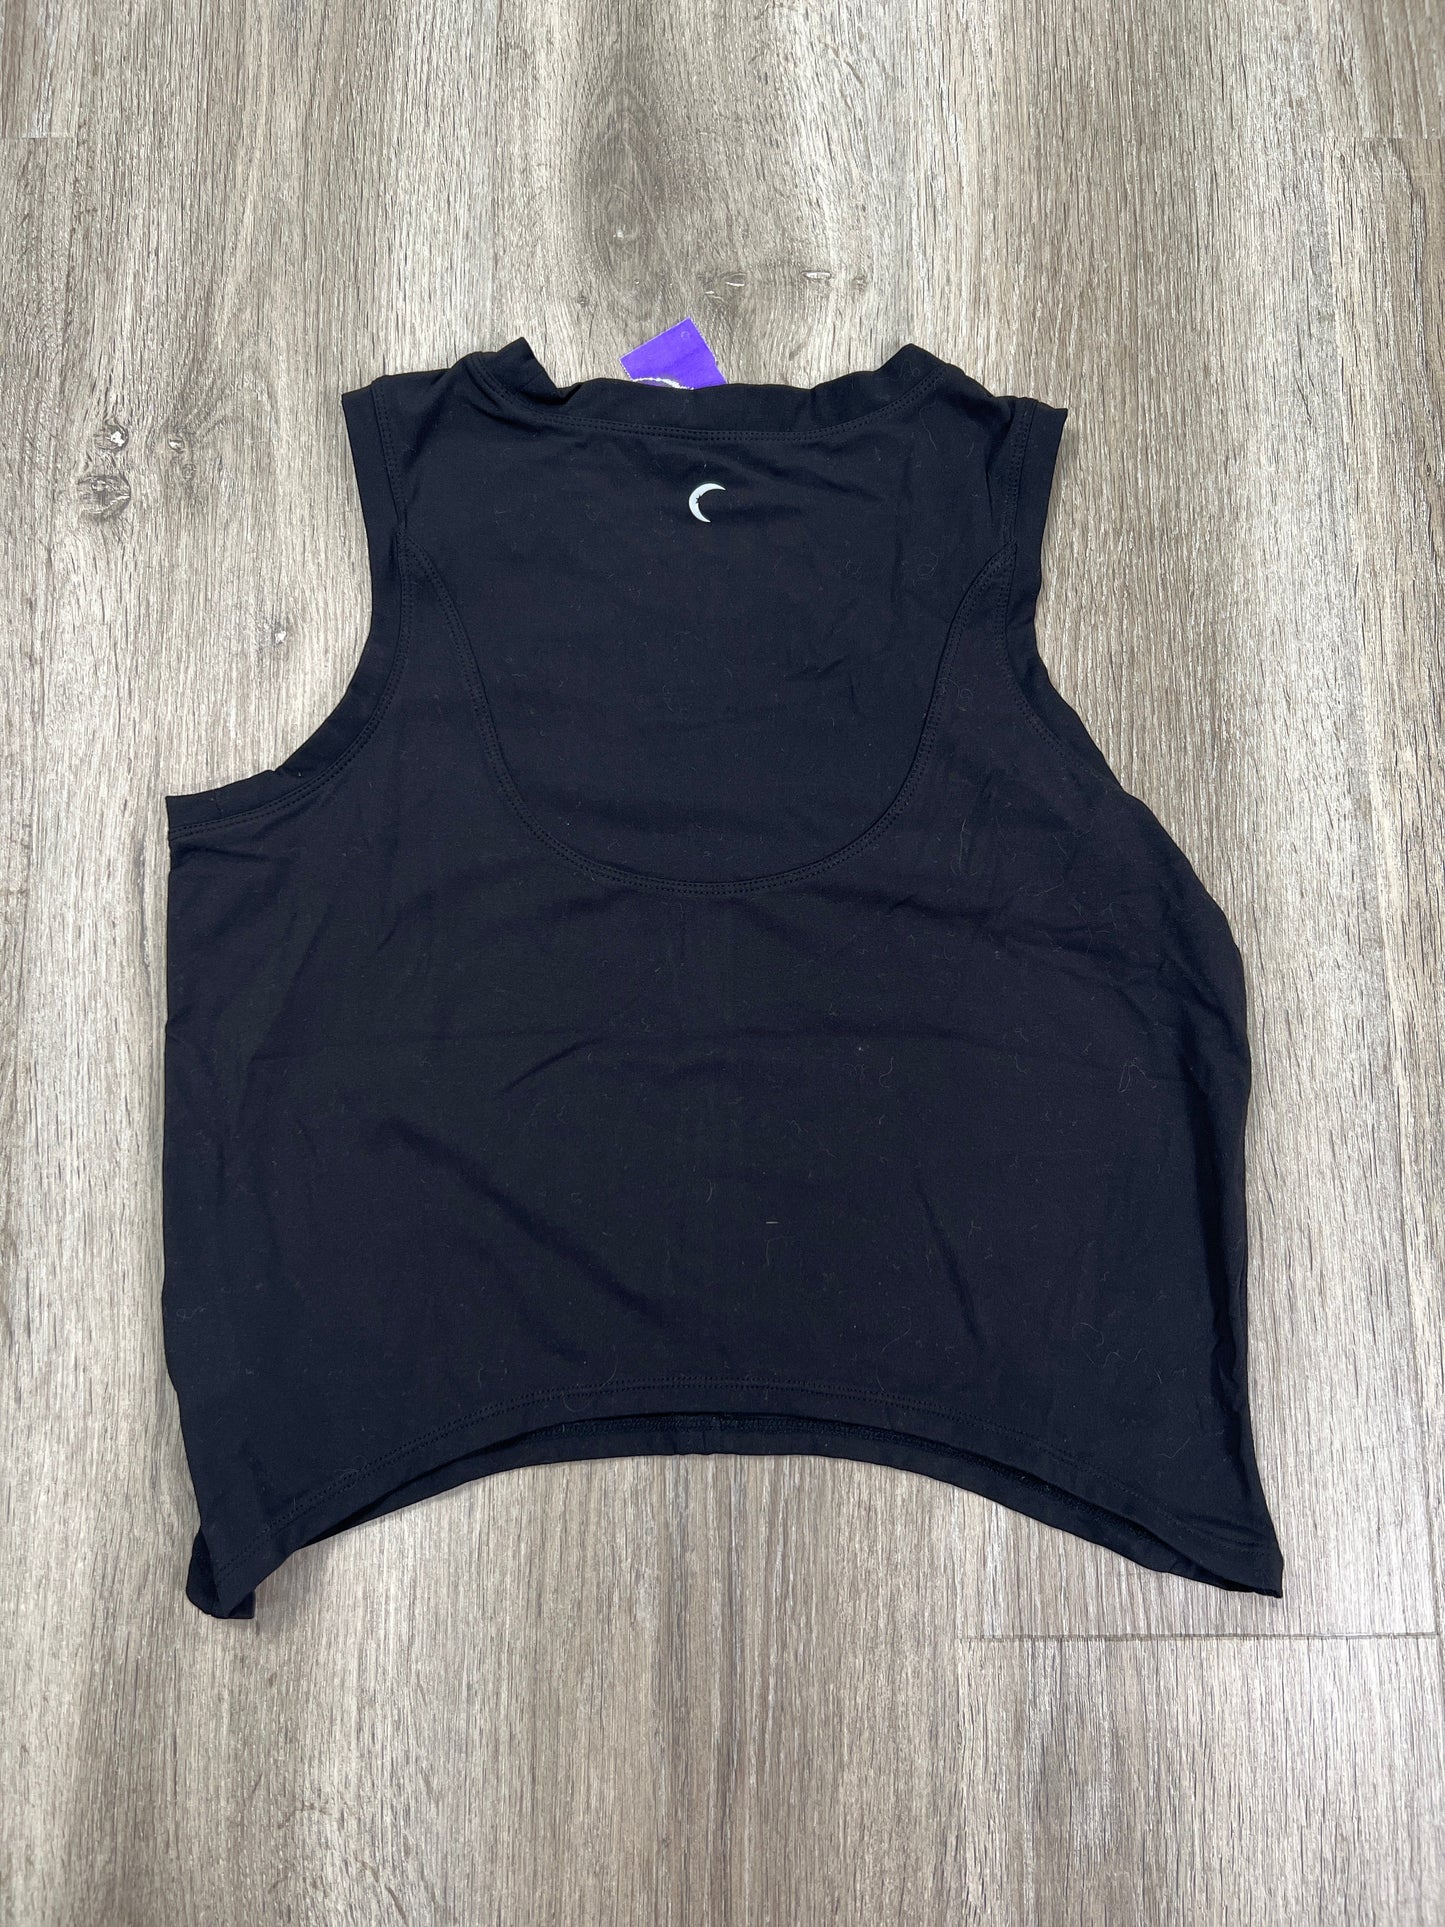 Athletic Tank Top By Zyia  Size: S